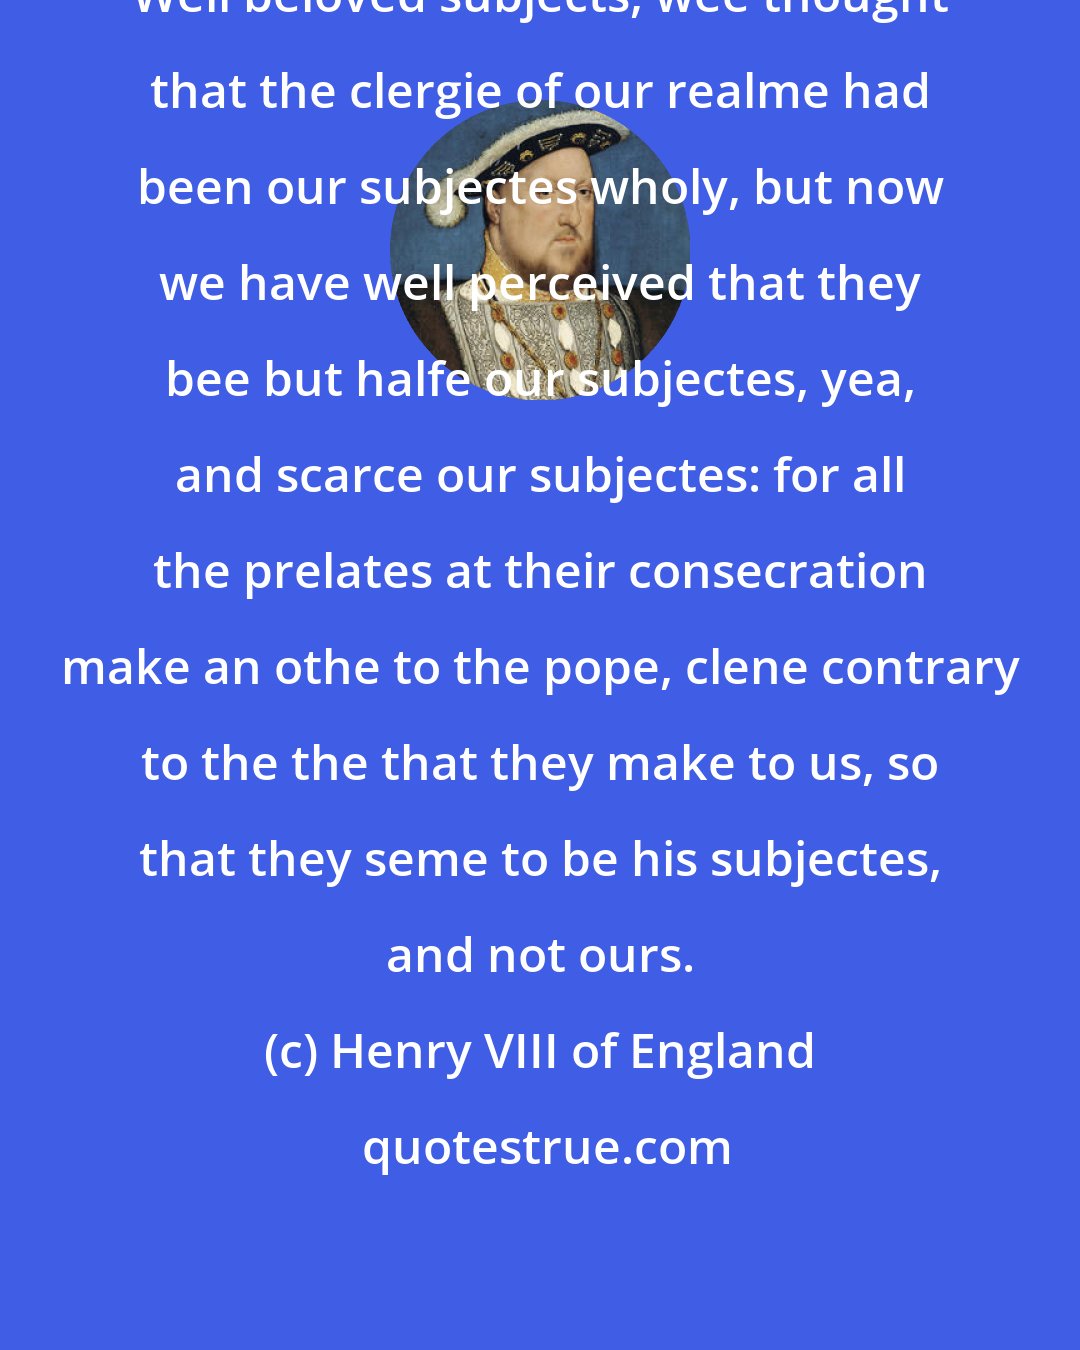 Henry VIII of England: Well beloved subjects, wee thought that the clergie of our realme had been our subjectes wholy, but now we have well perceived that they bee but halfe our subjectes, yea, and scarce our subjectes: for all the prelates at their consecration make an othe to the pope, clene contrary to the the that they make to us, so that they seme to be his subjectes, and not ours.